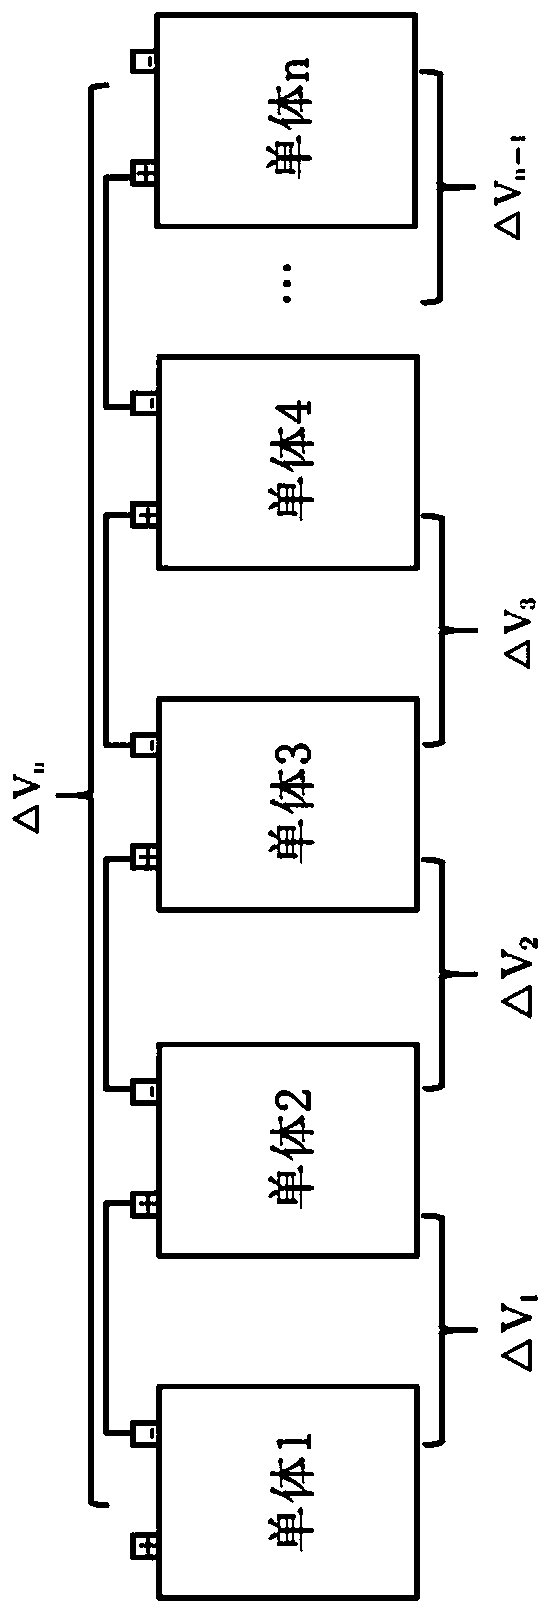 Relaxation voltage characteristic-based battery internal short circuit diagnosis method